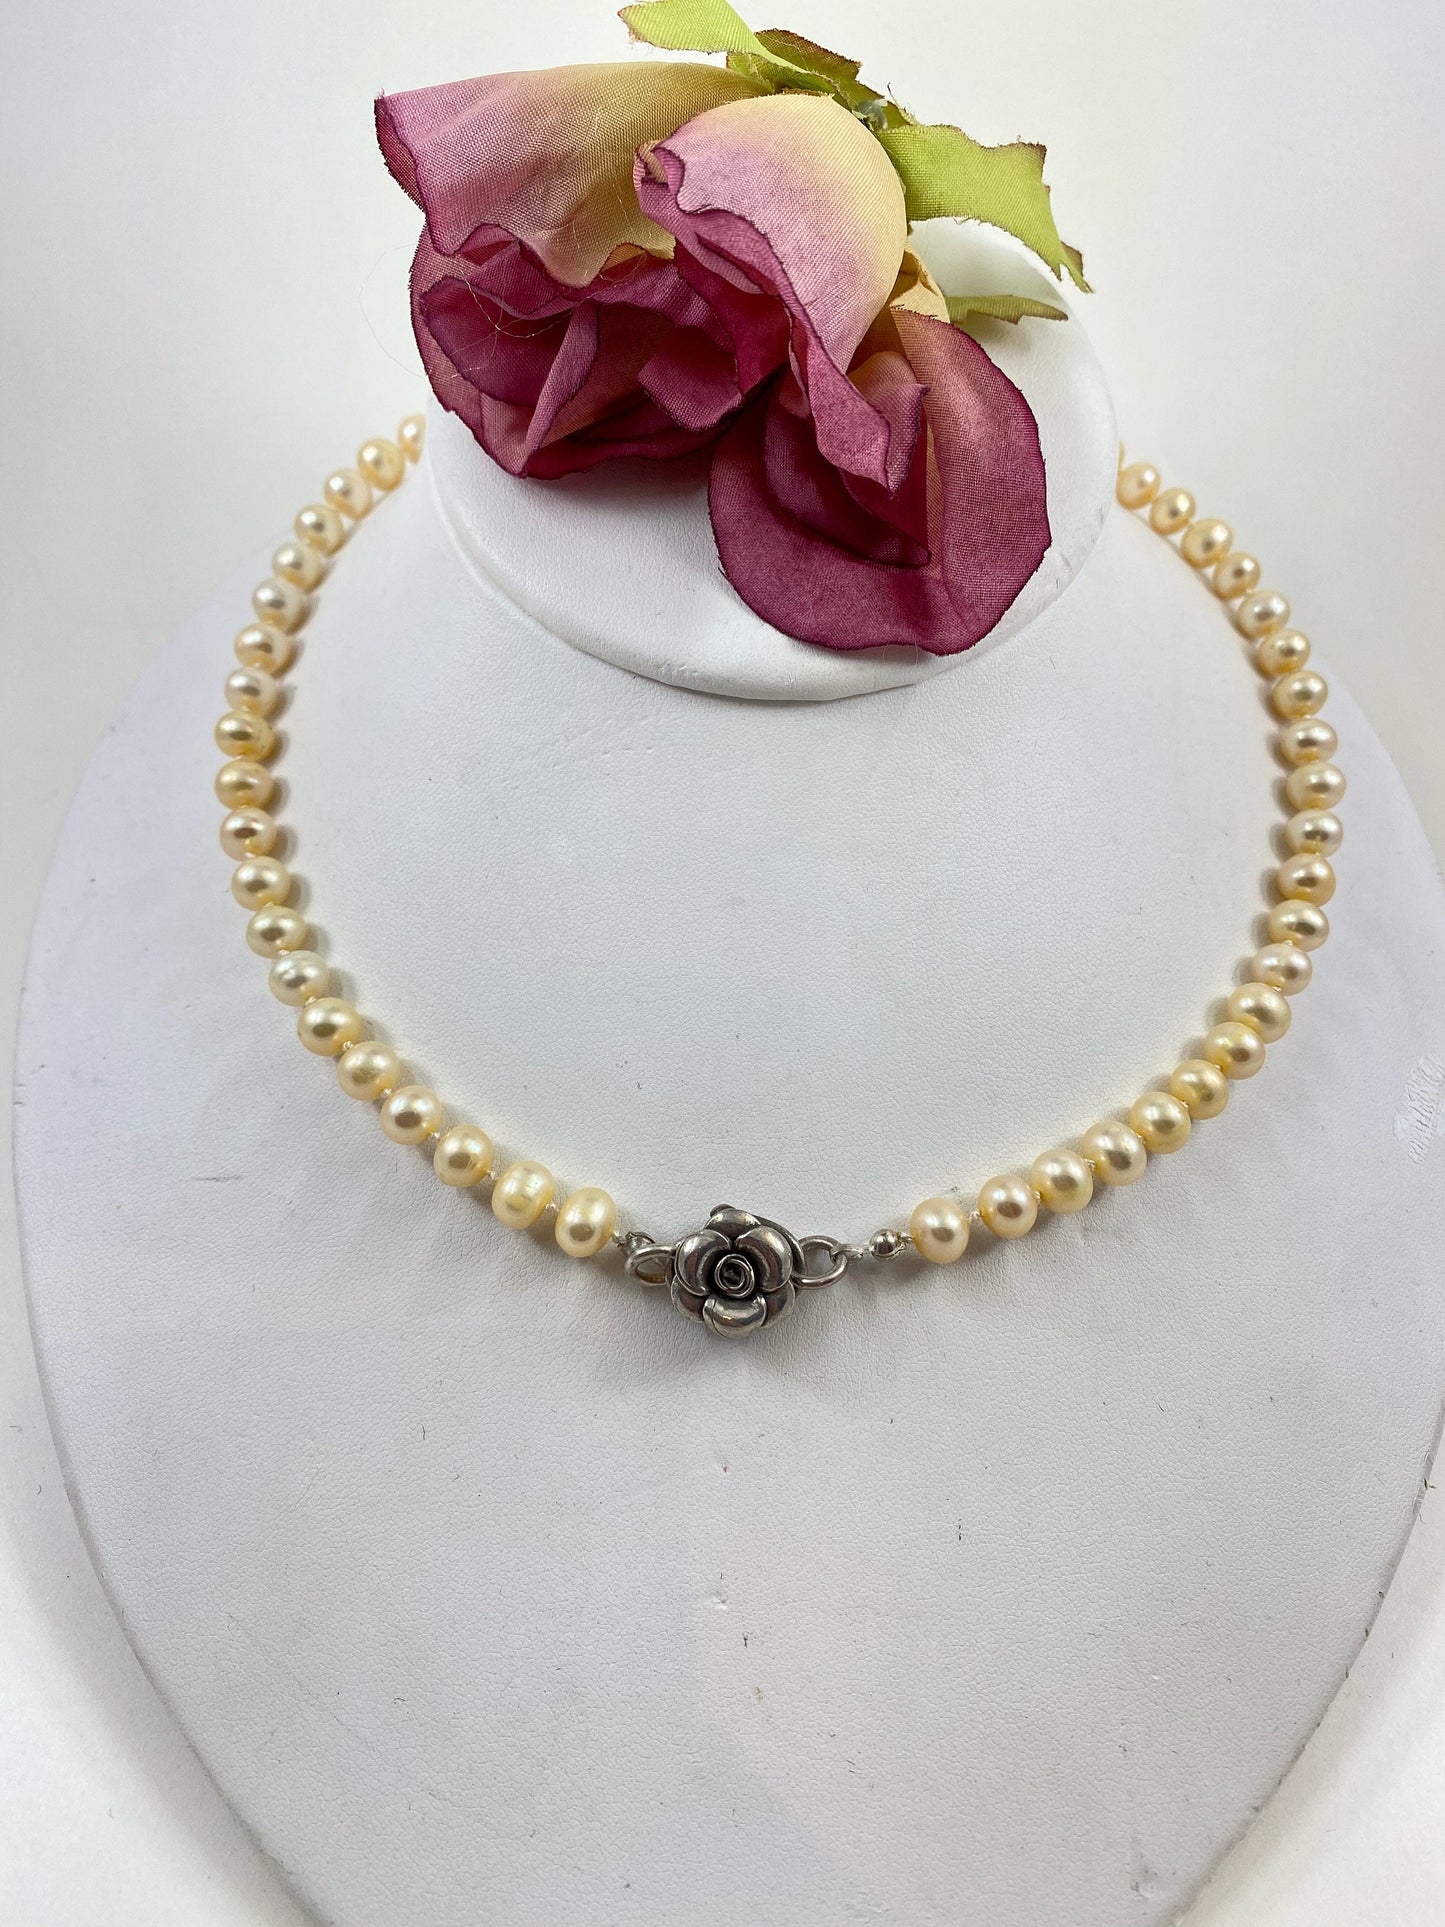 Gorgeous soft butter yellow knotted fresh water pearl necklace. The necklace is finished with a Thai sterling silver flower clasp.